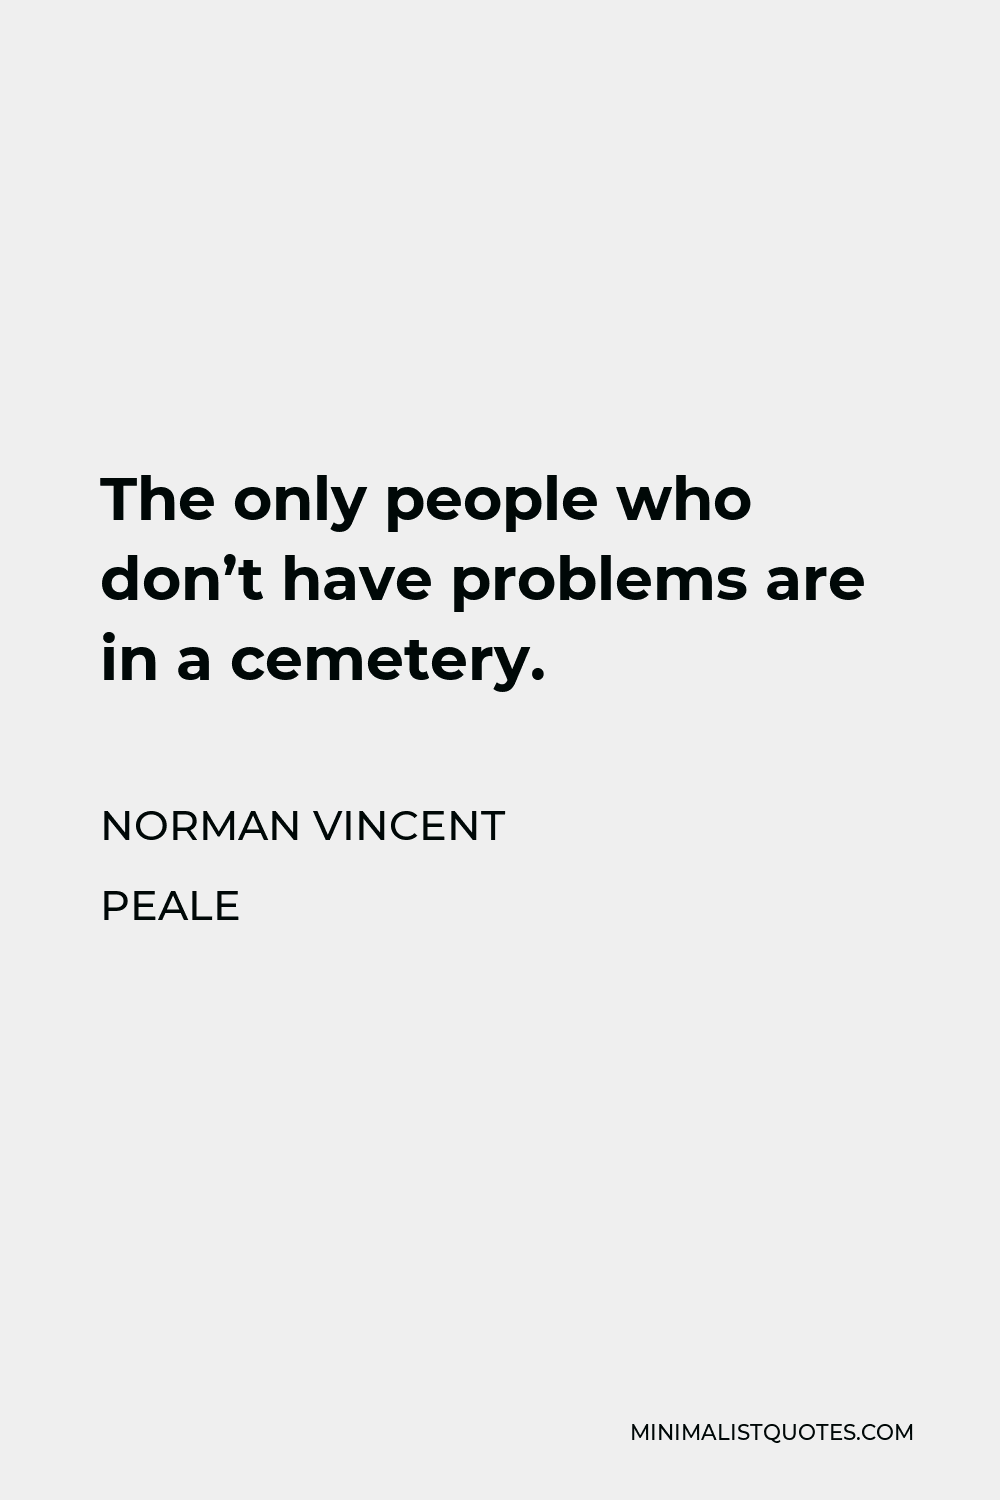 Norman Vincent Peale Quote - The only people who don’t have problems are in a cemetery.